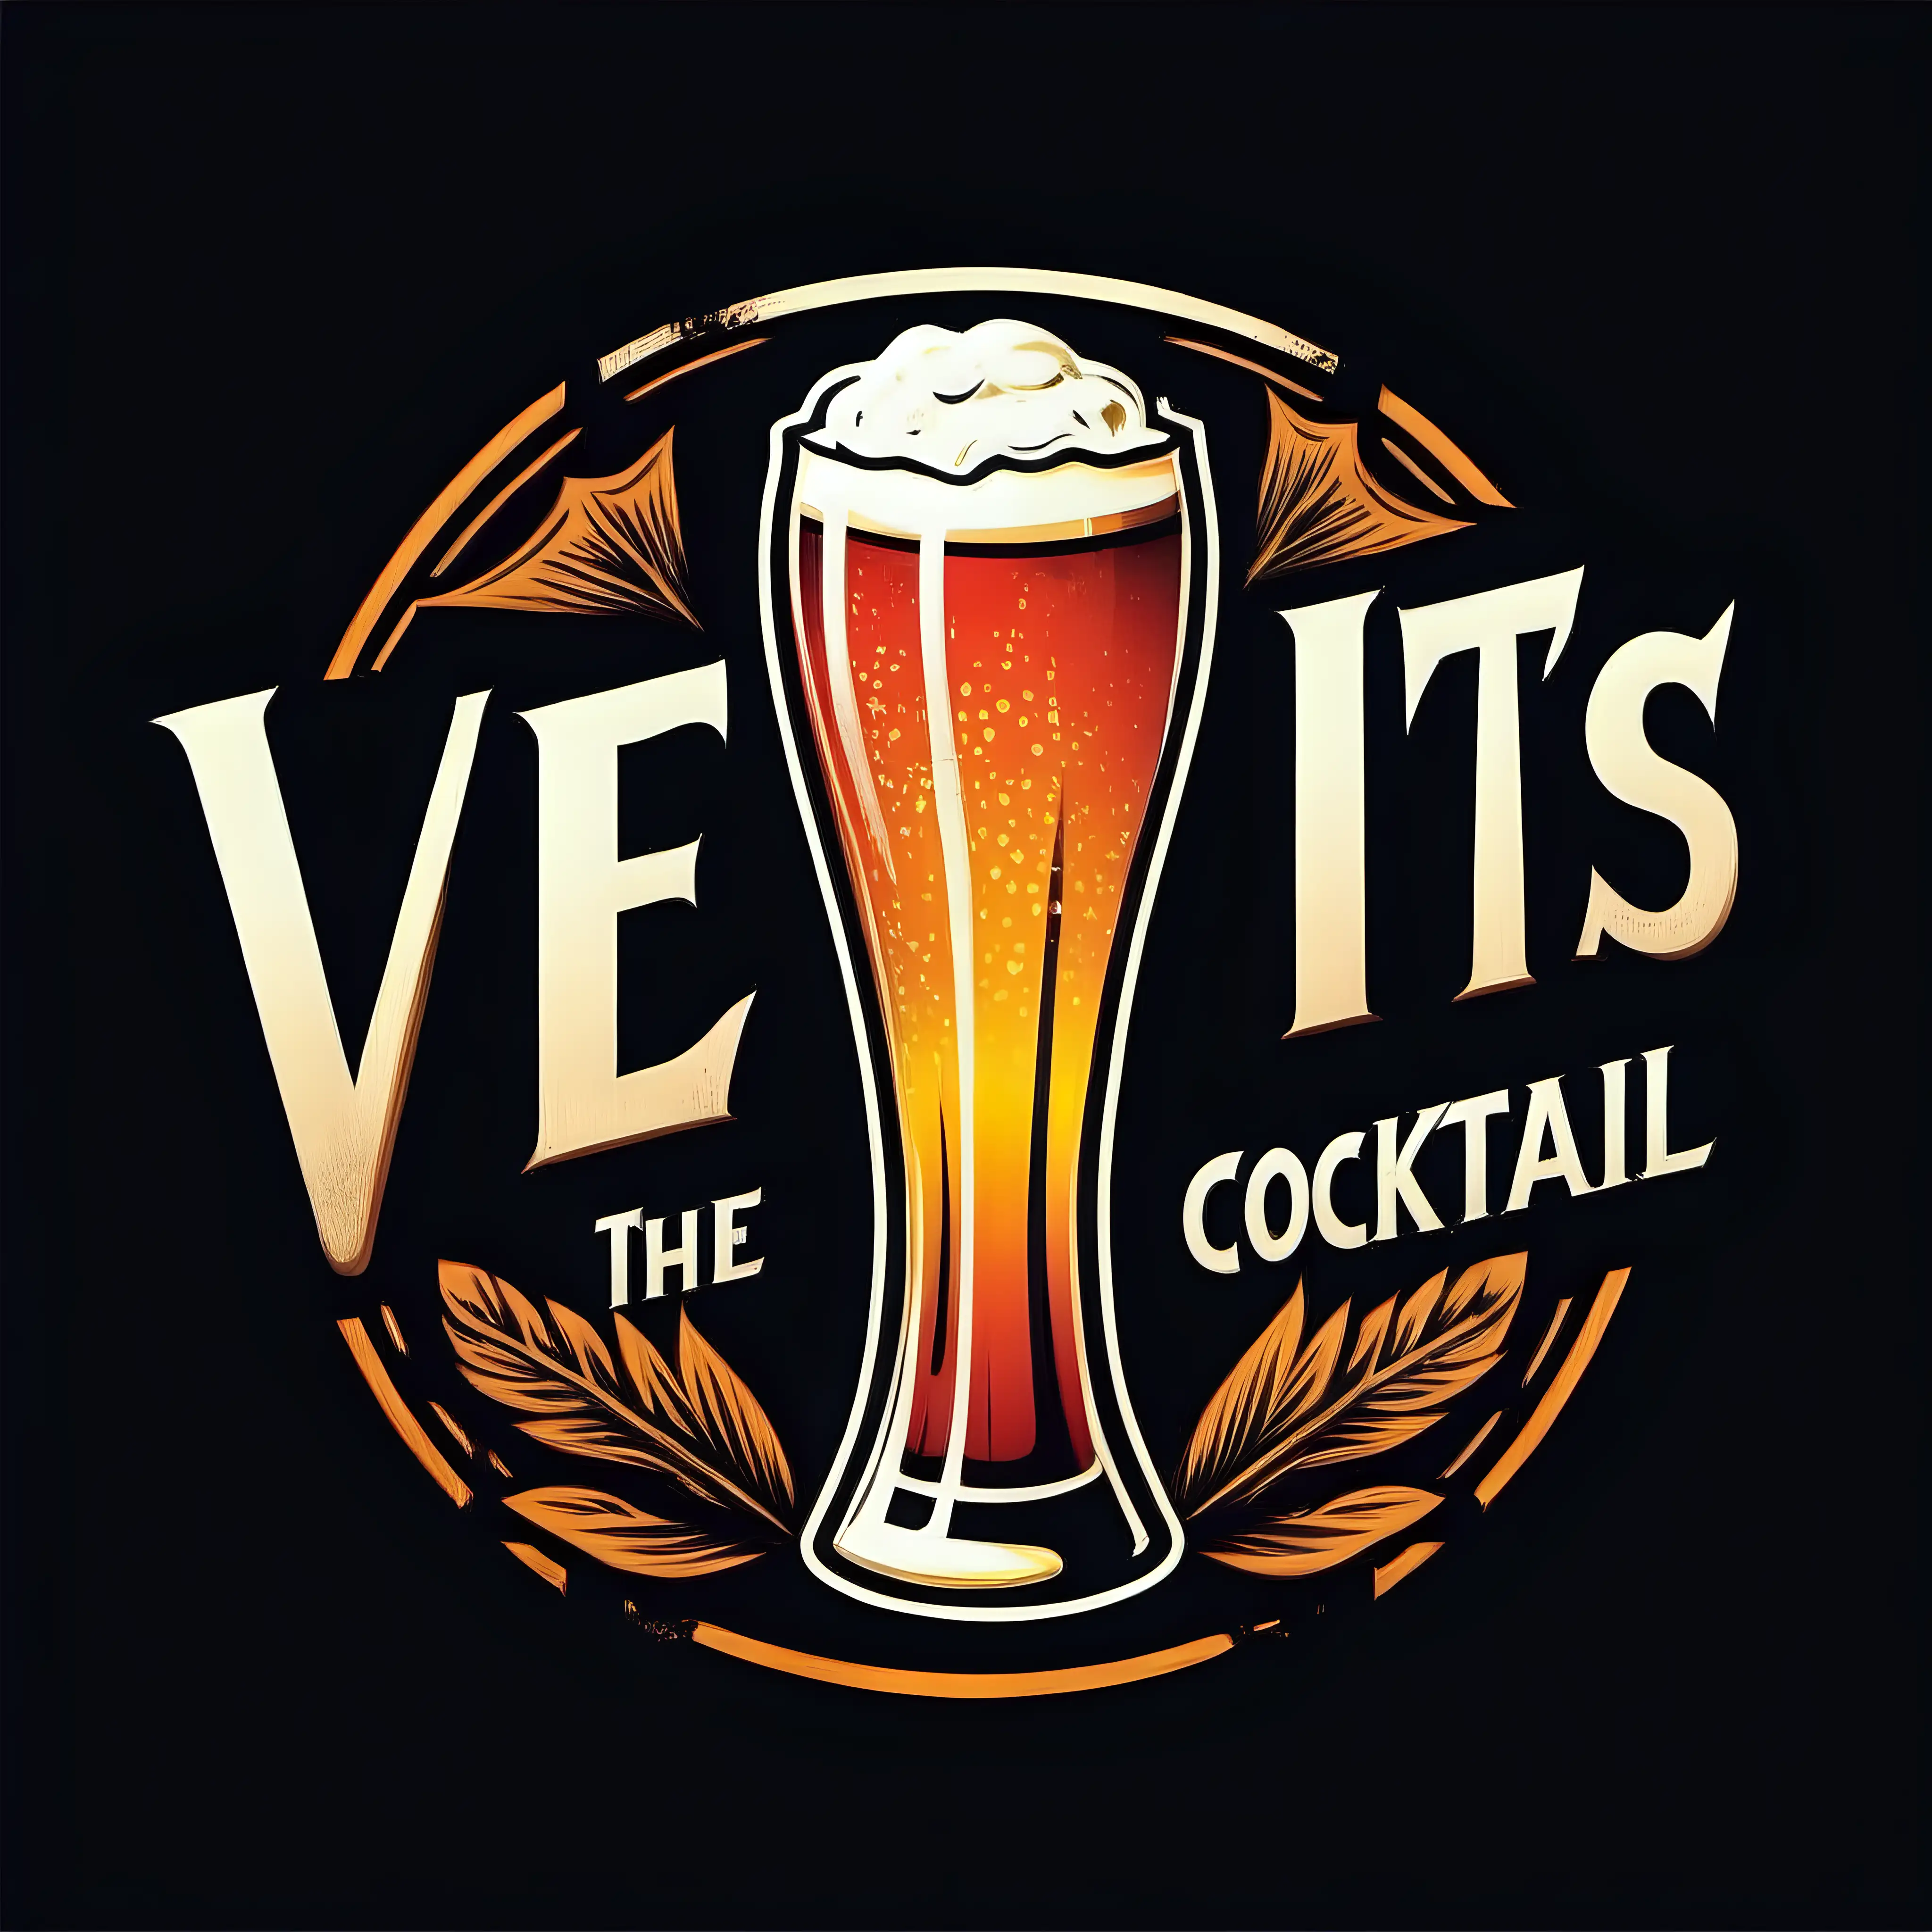 Viets Logo Beer Cocktail Unique Fusion of Flavorful Libations